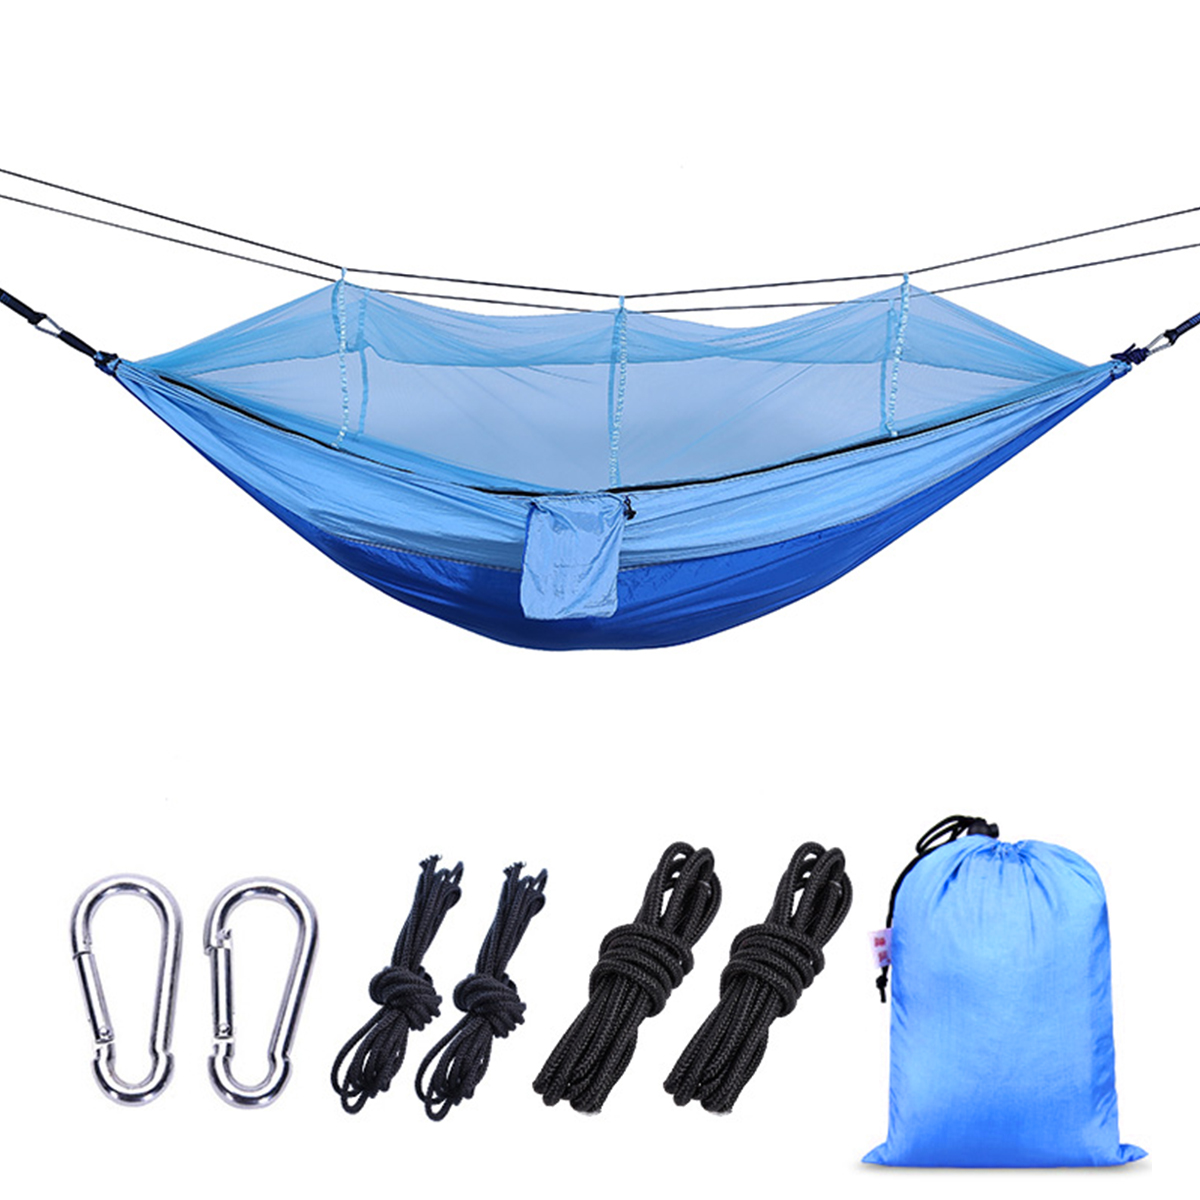 IPReereg-260140CM-With-Mosquito-Net-Portable-Travel-Hammock-Comfortable-Hommock-Camping-Bed-Fits-2-P-1726267-11